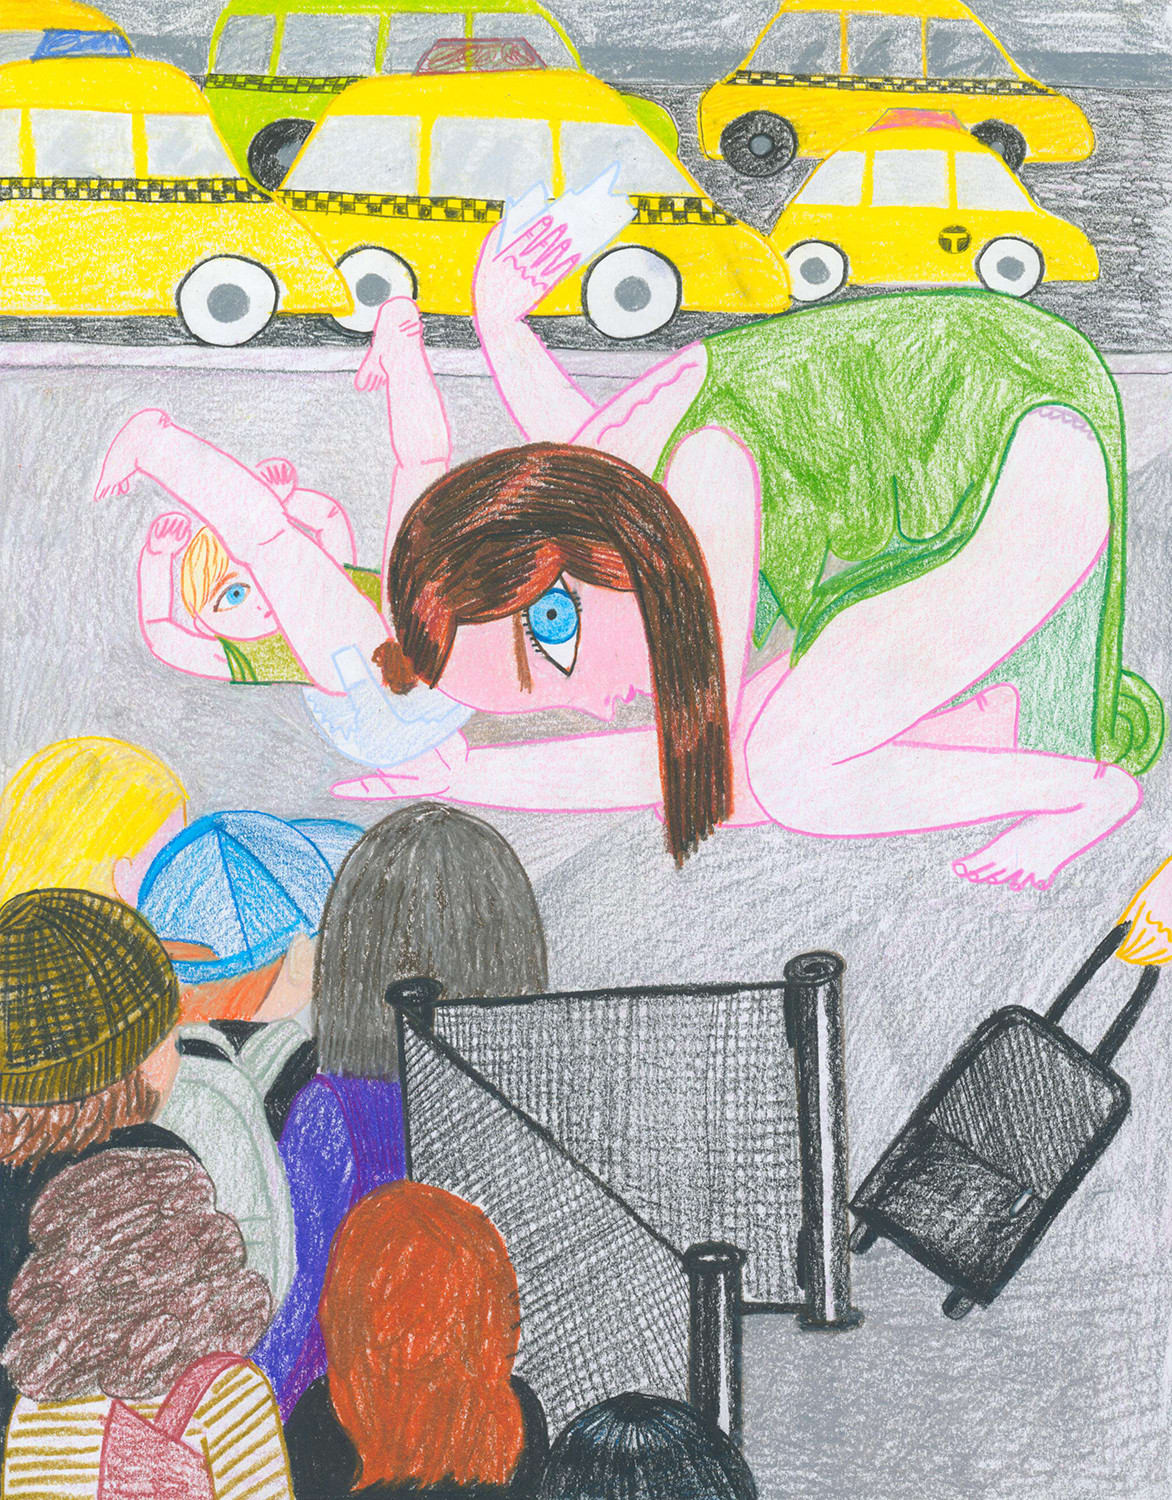 Drawing of the artist changing her child’s diaper on the curb in front of people standing in the yellow taxis stand at JFK airport. 